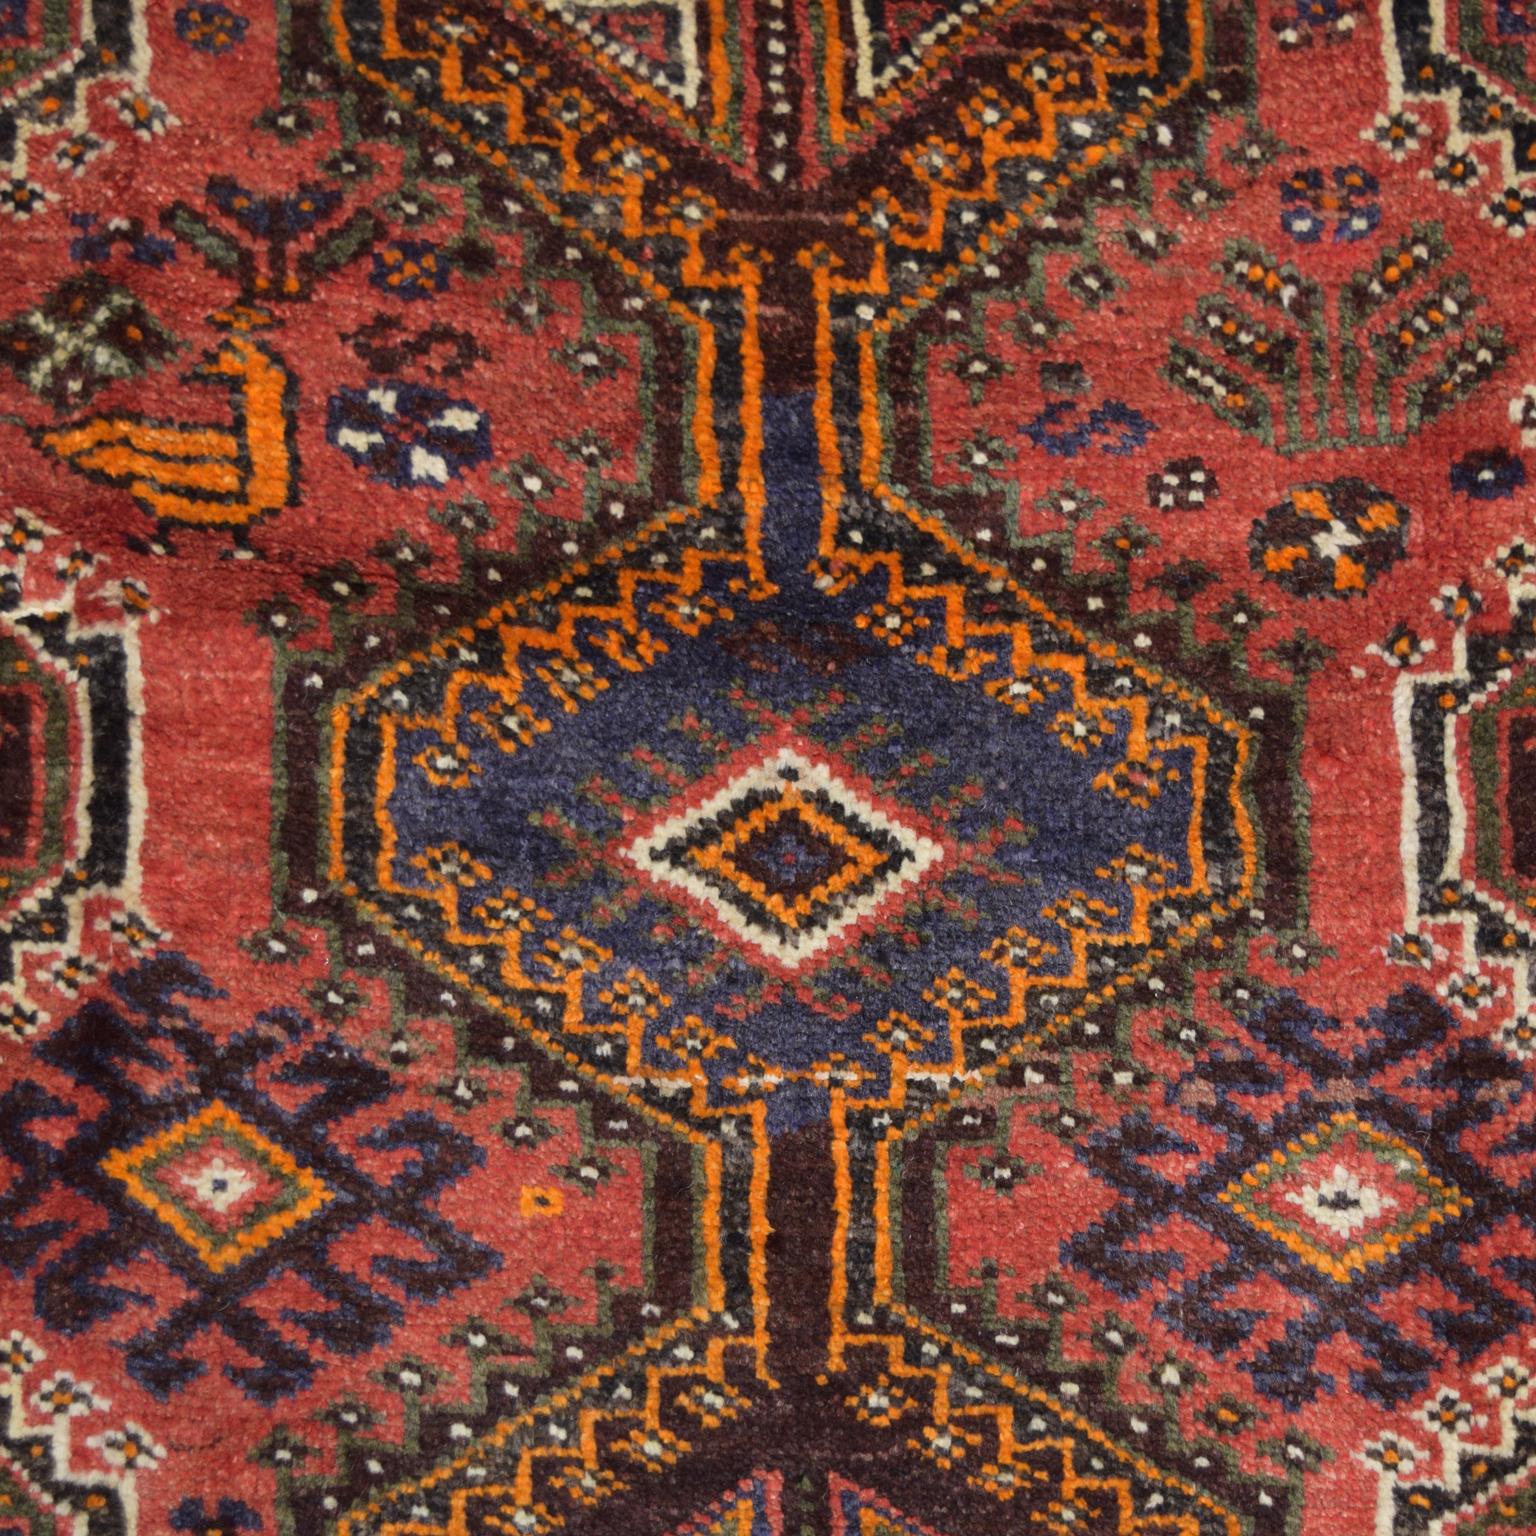 Hand-knotted and organically dyed, this Persian Qashqai carpet in red, pink, and cream wool measures 5’4” x 8’6” and belongs to the Orley Shabahang World Market Collection. Crafted in Iran, this carpet uses a traditional Persian weaving technique.